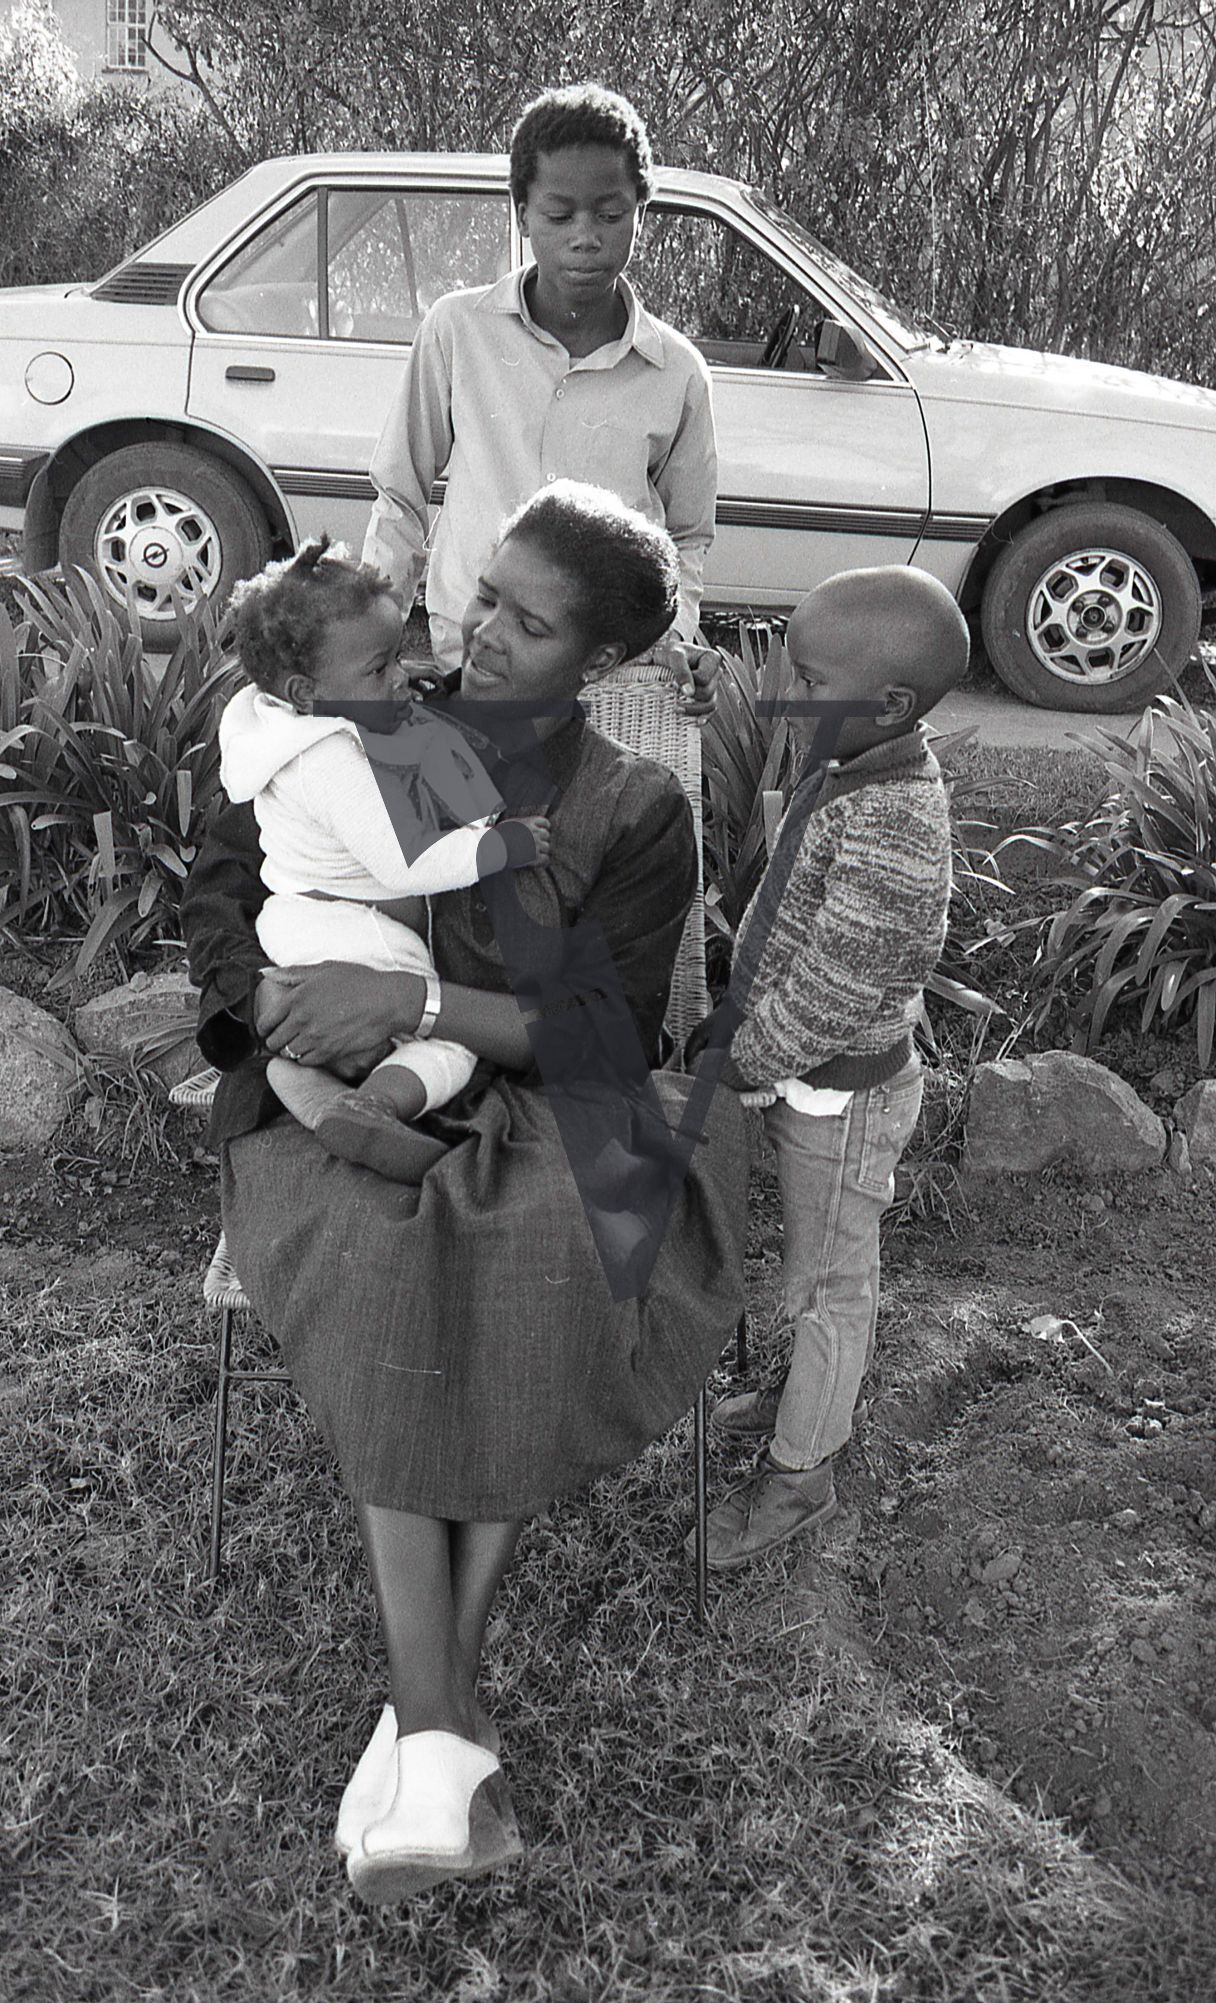 South Africa, Transkei, family, mother with infant, young boys, car, portrait, full shop.